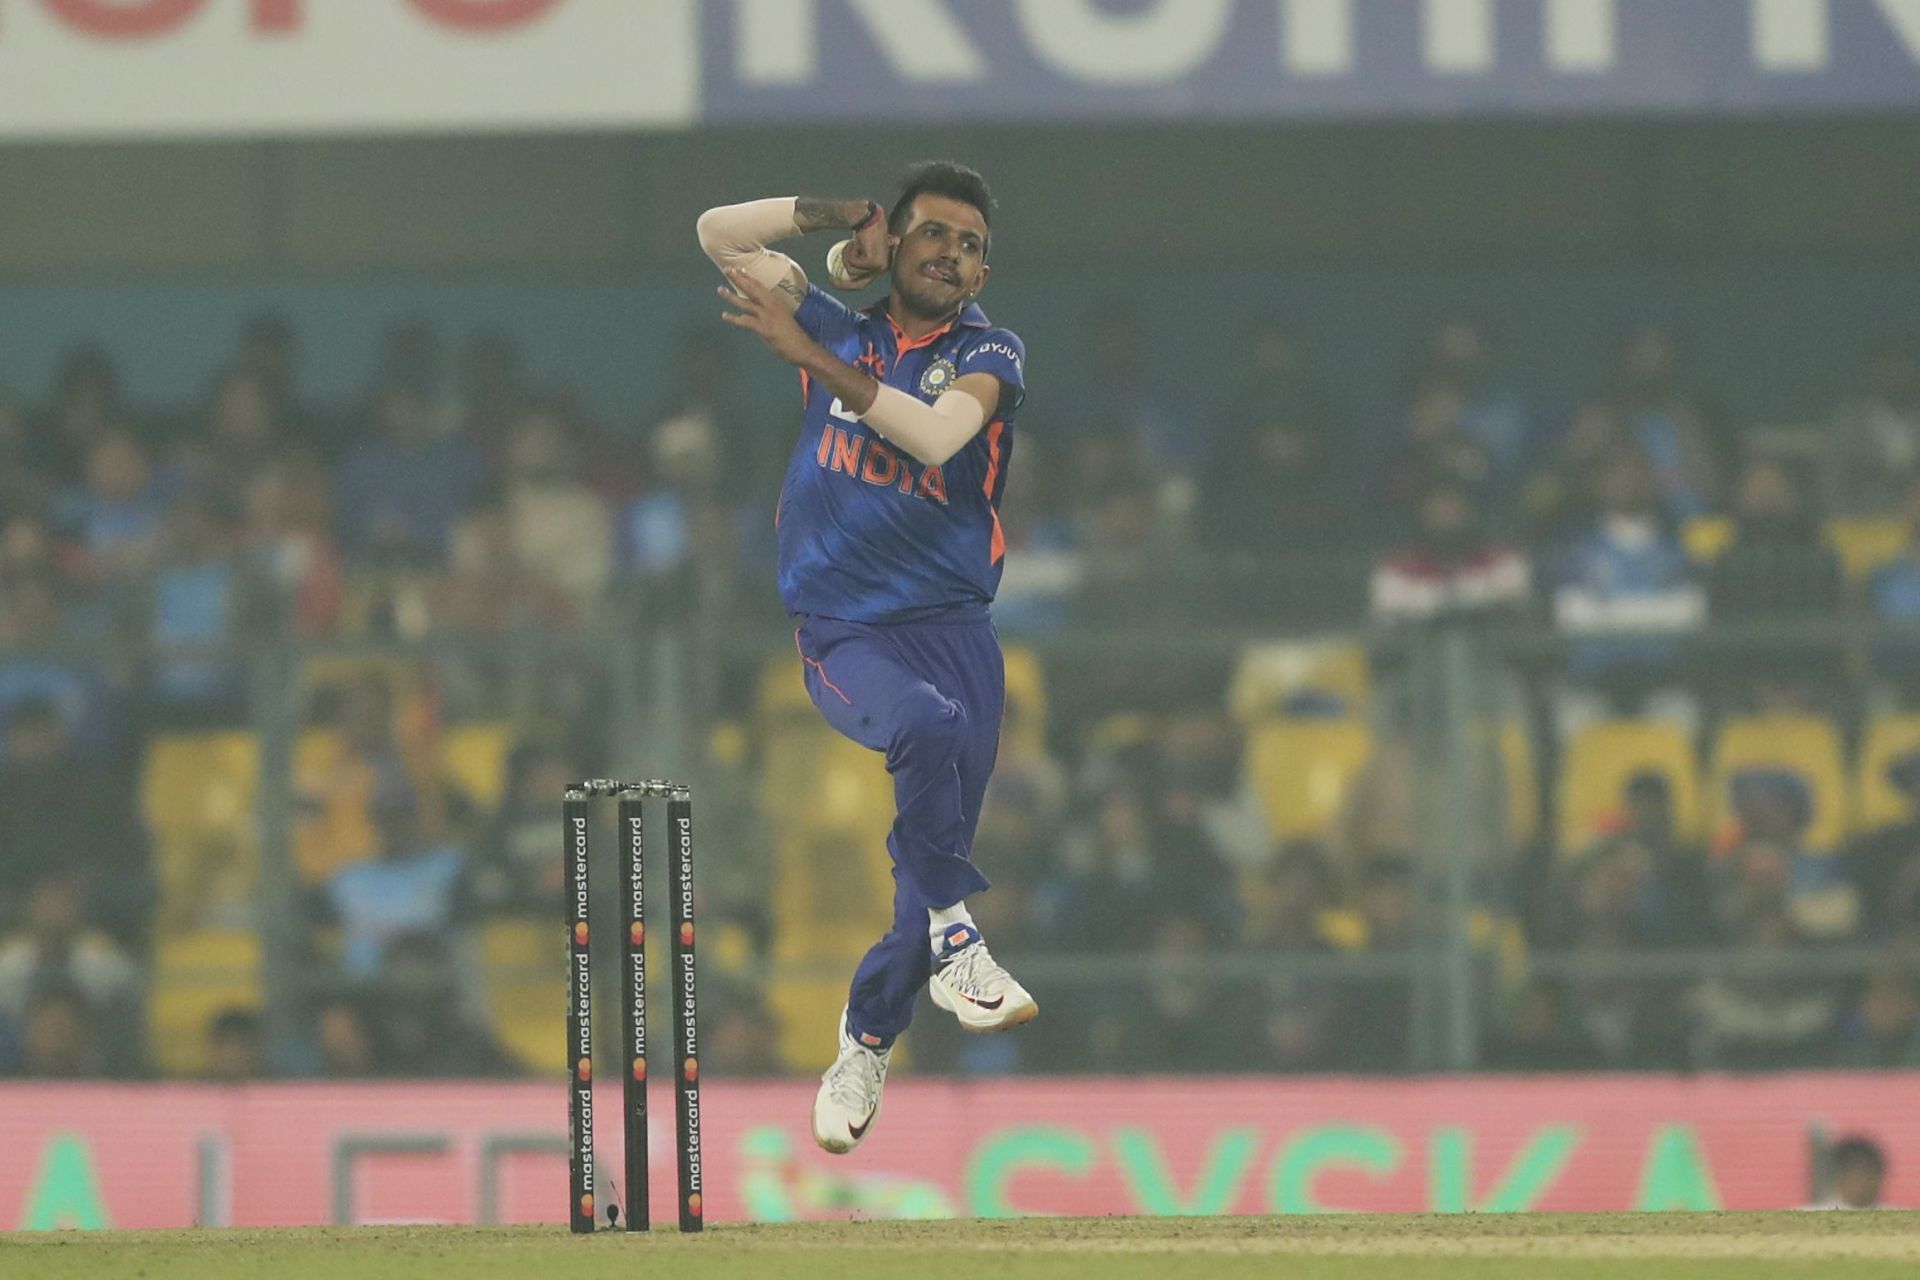 Yuzvendra Chahal picked up only one wicket in favorable bowling conditions